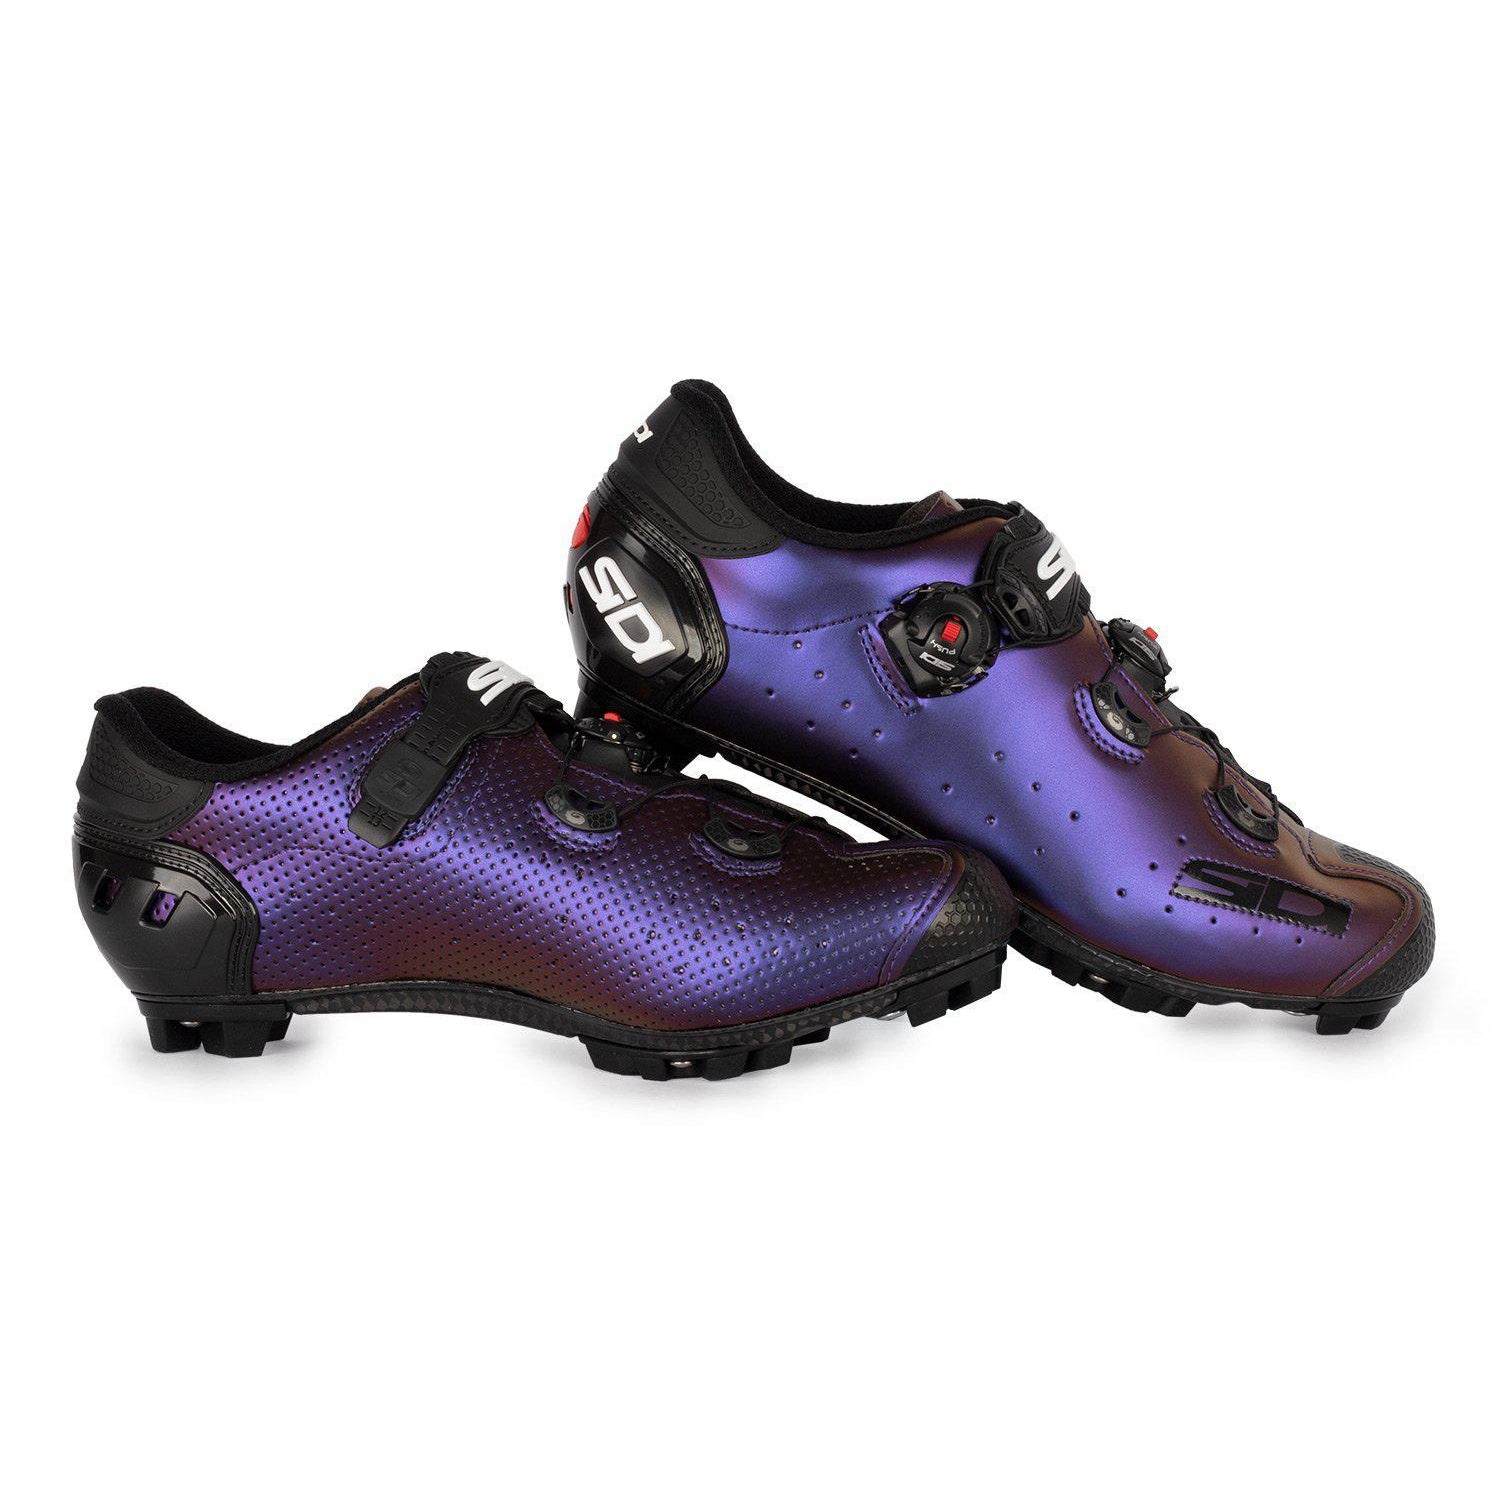 best gravel cycling shoes 219